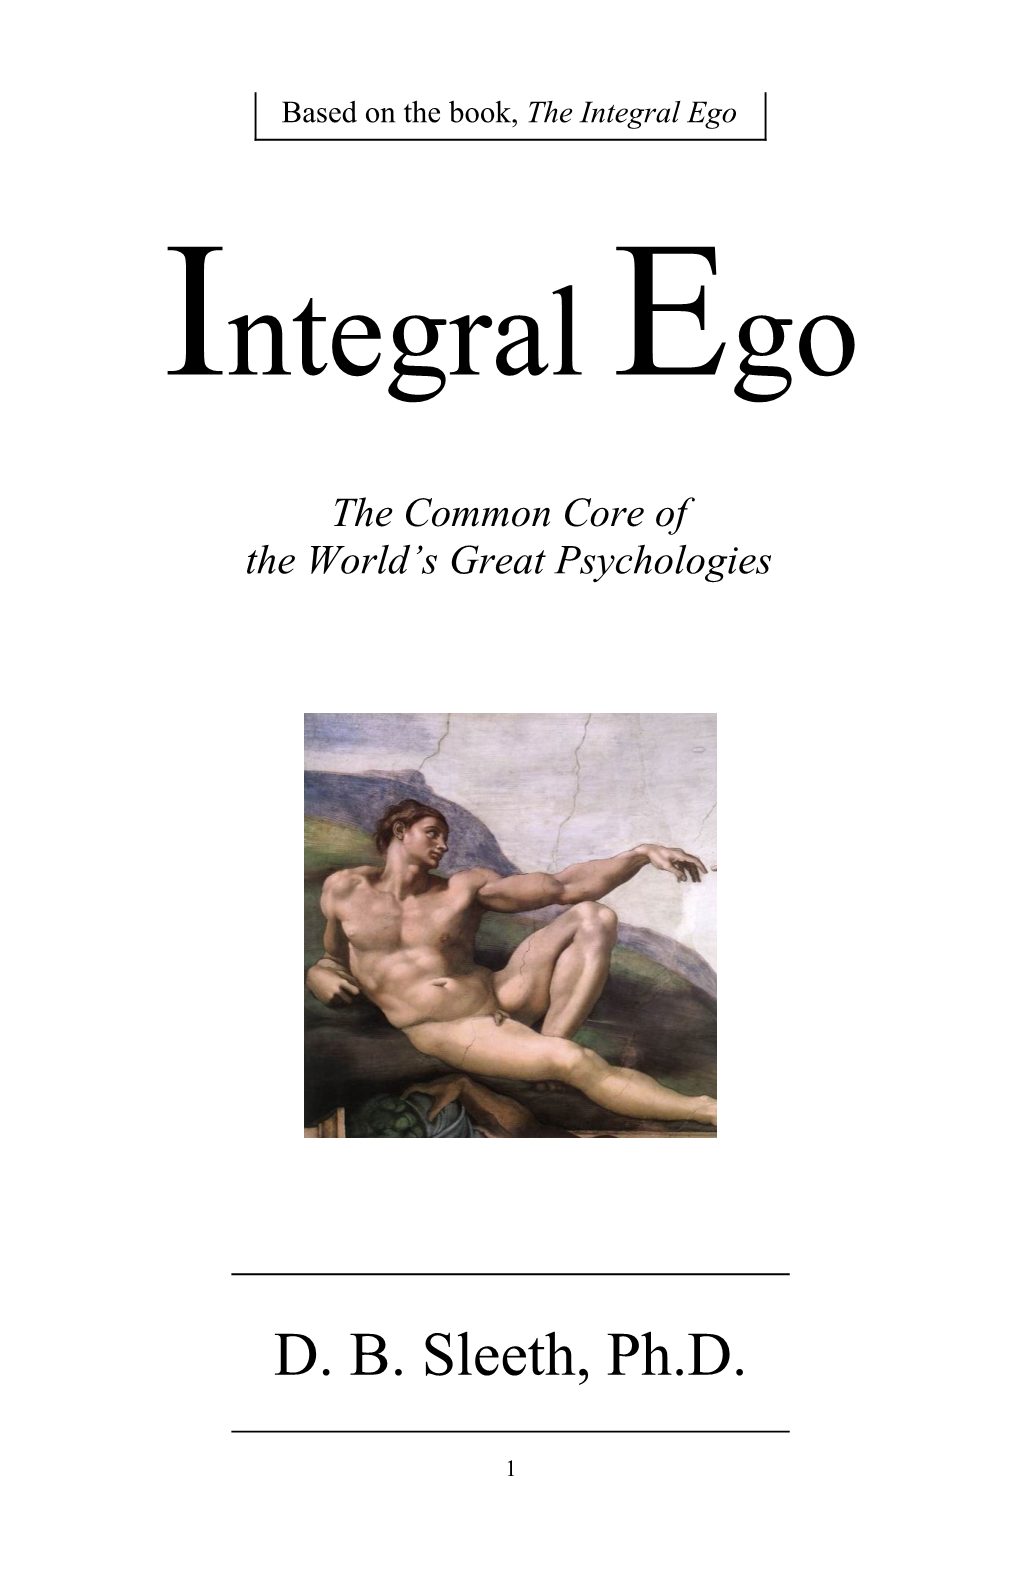 The Integral Ego